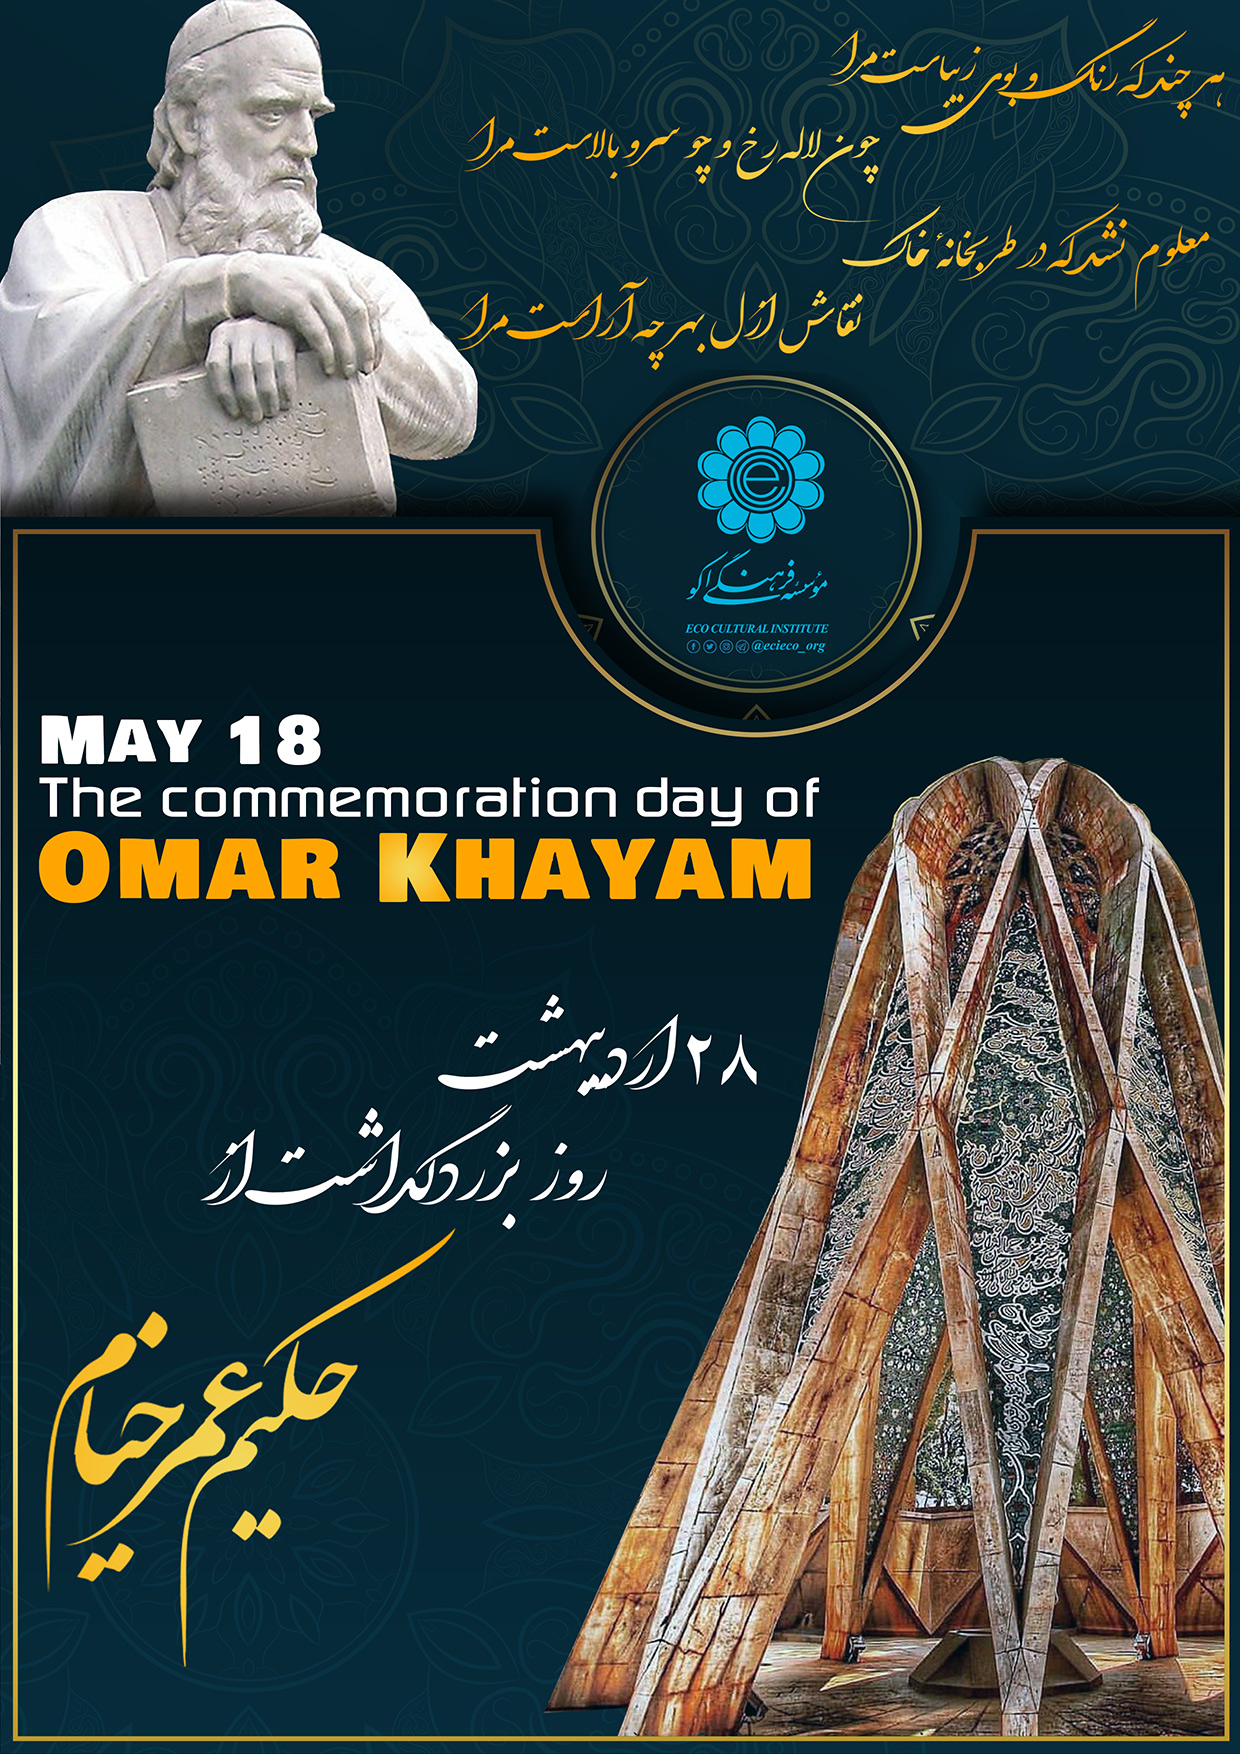 ECO Cultural Institute honors Hakim Omar Khayyam's commemoration day